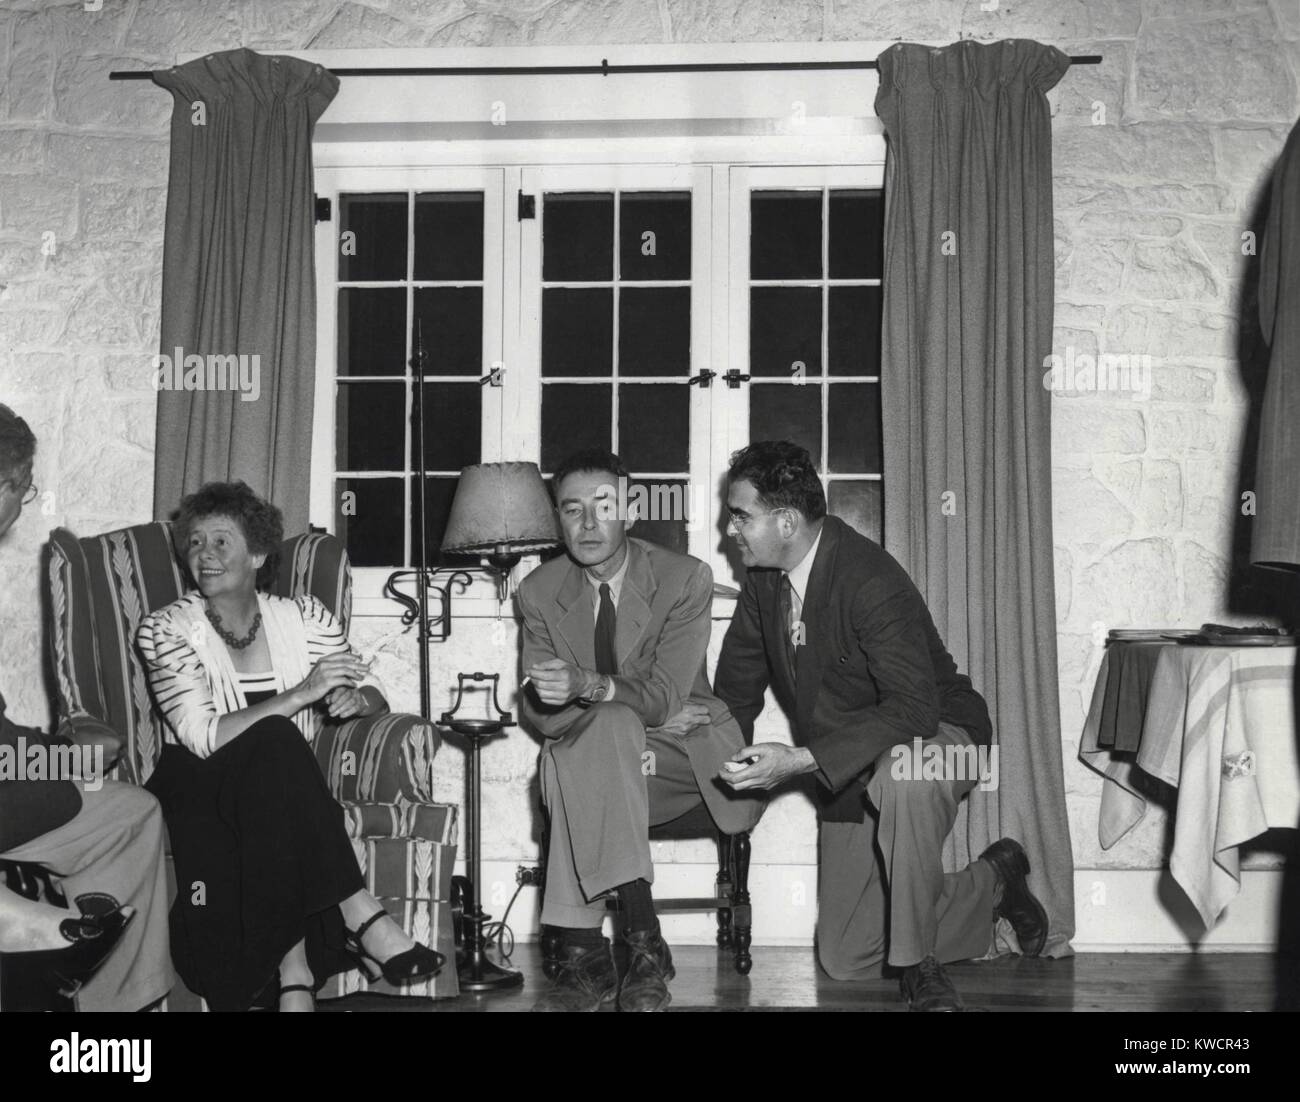 Dorothy McKibbin, physicists Robert Oppenheimer, and Victor Weisskoph at Los Alamos. Ca. 1943-5. McKibbin was the 'Gate Keeper' clearing all incoming people and equipment before they could be admitted to Los Alamos Laboratory. - (BSLOC 2015 1 85) Stock Photo